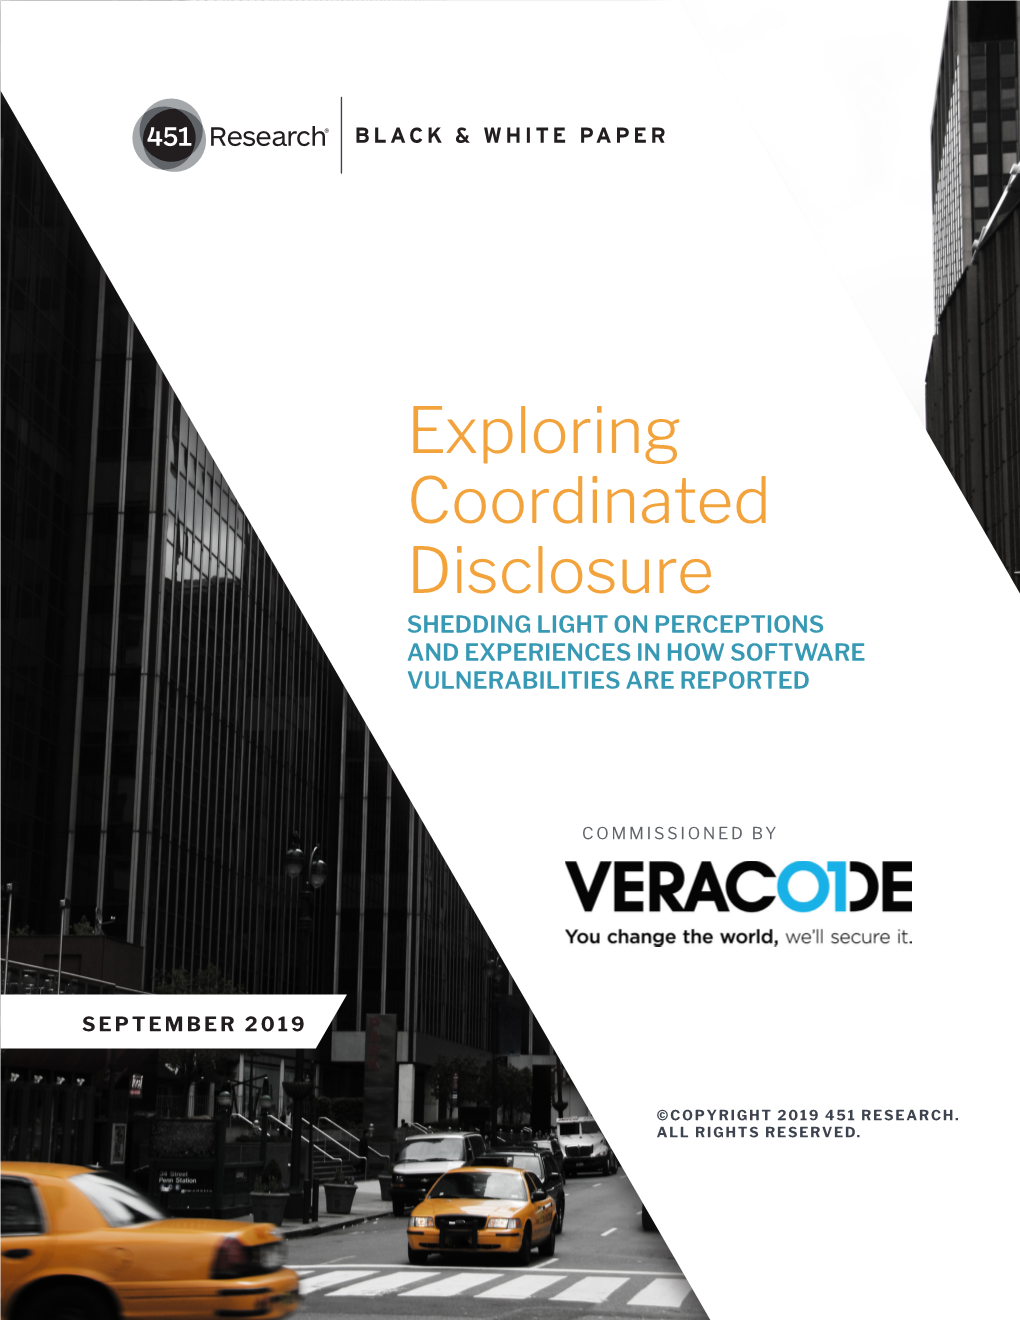 Exploring Coordinated Disclosure SHEDDING LIGHT on PERCEPTIONS and EXPERIENCES in HOW SOFTWARE VULNERABILITIES ARE REPORTED